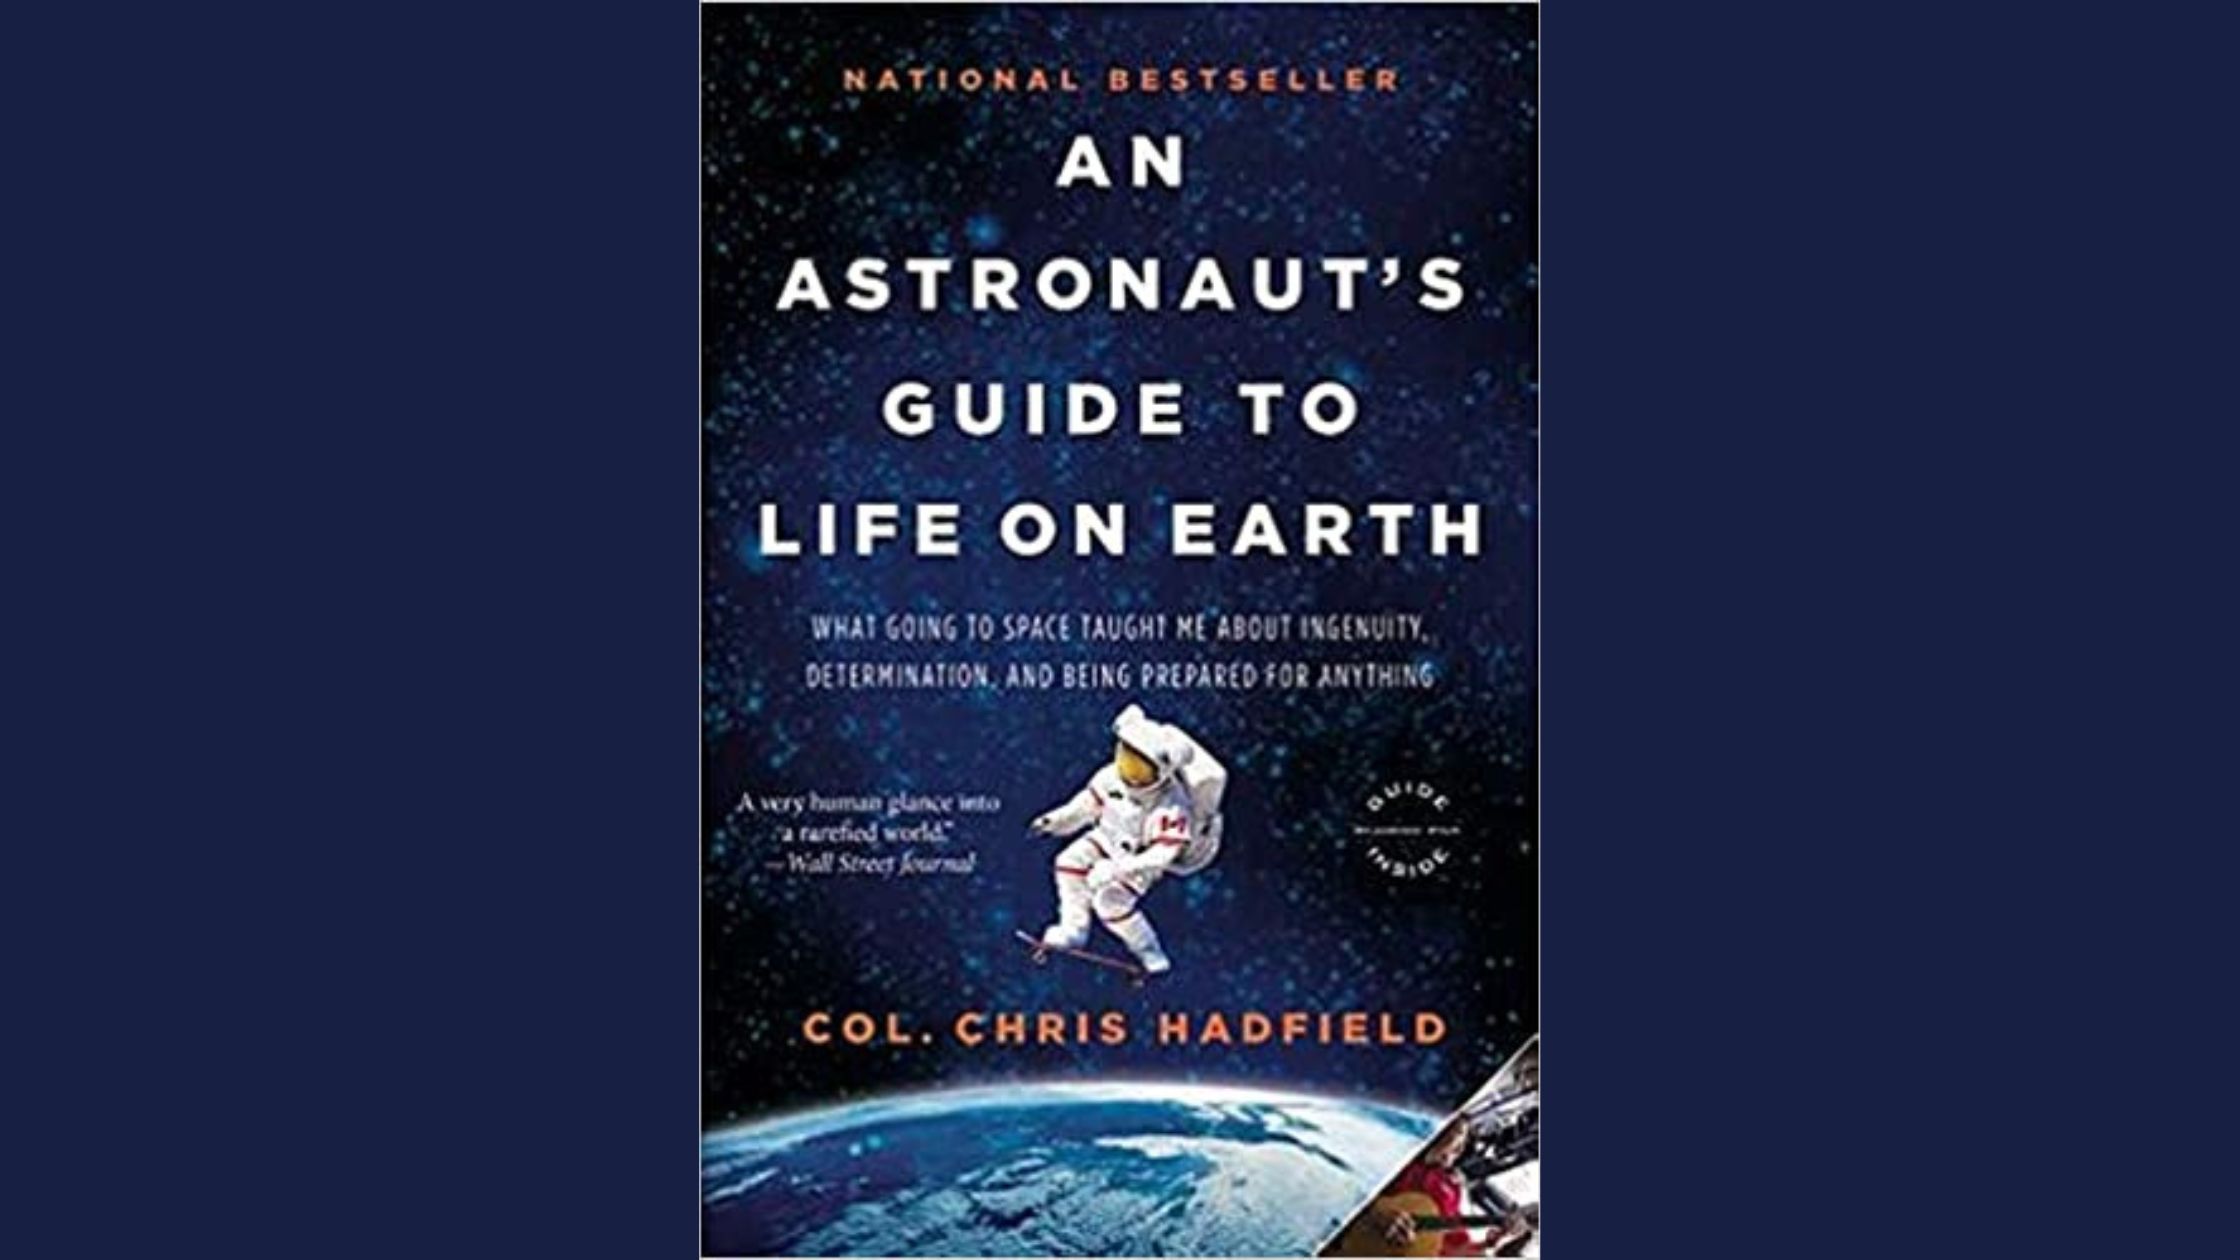 An Astronaut’s Guide to Earth Exploration